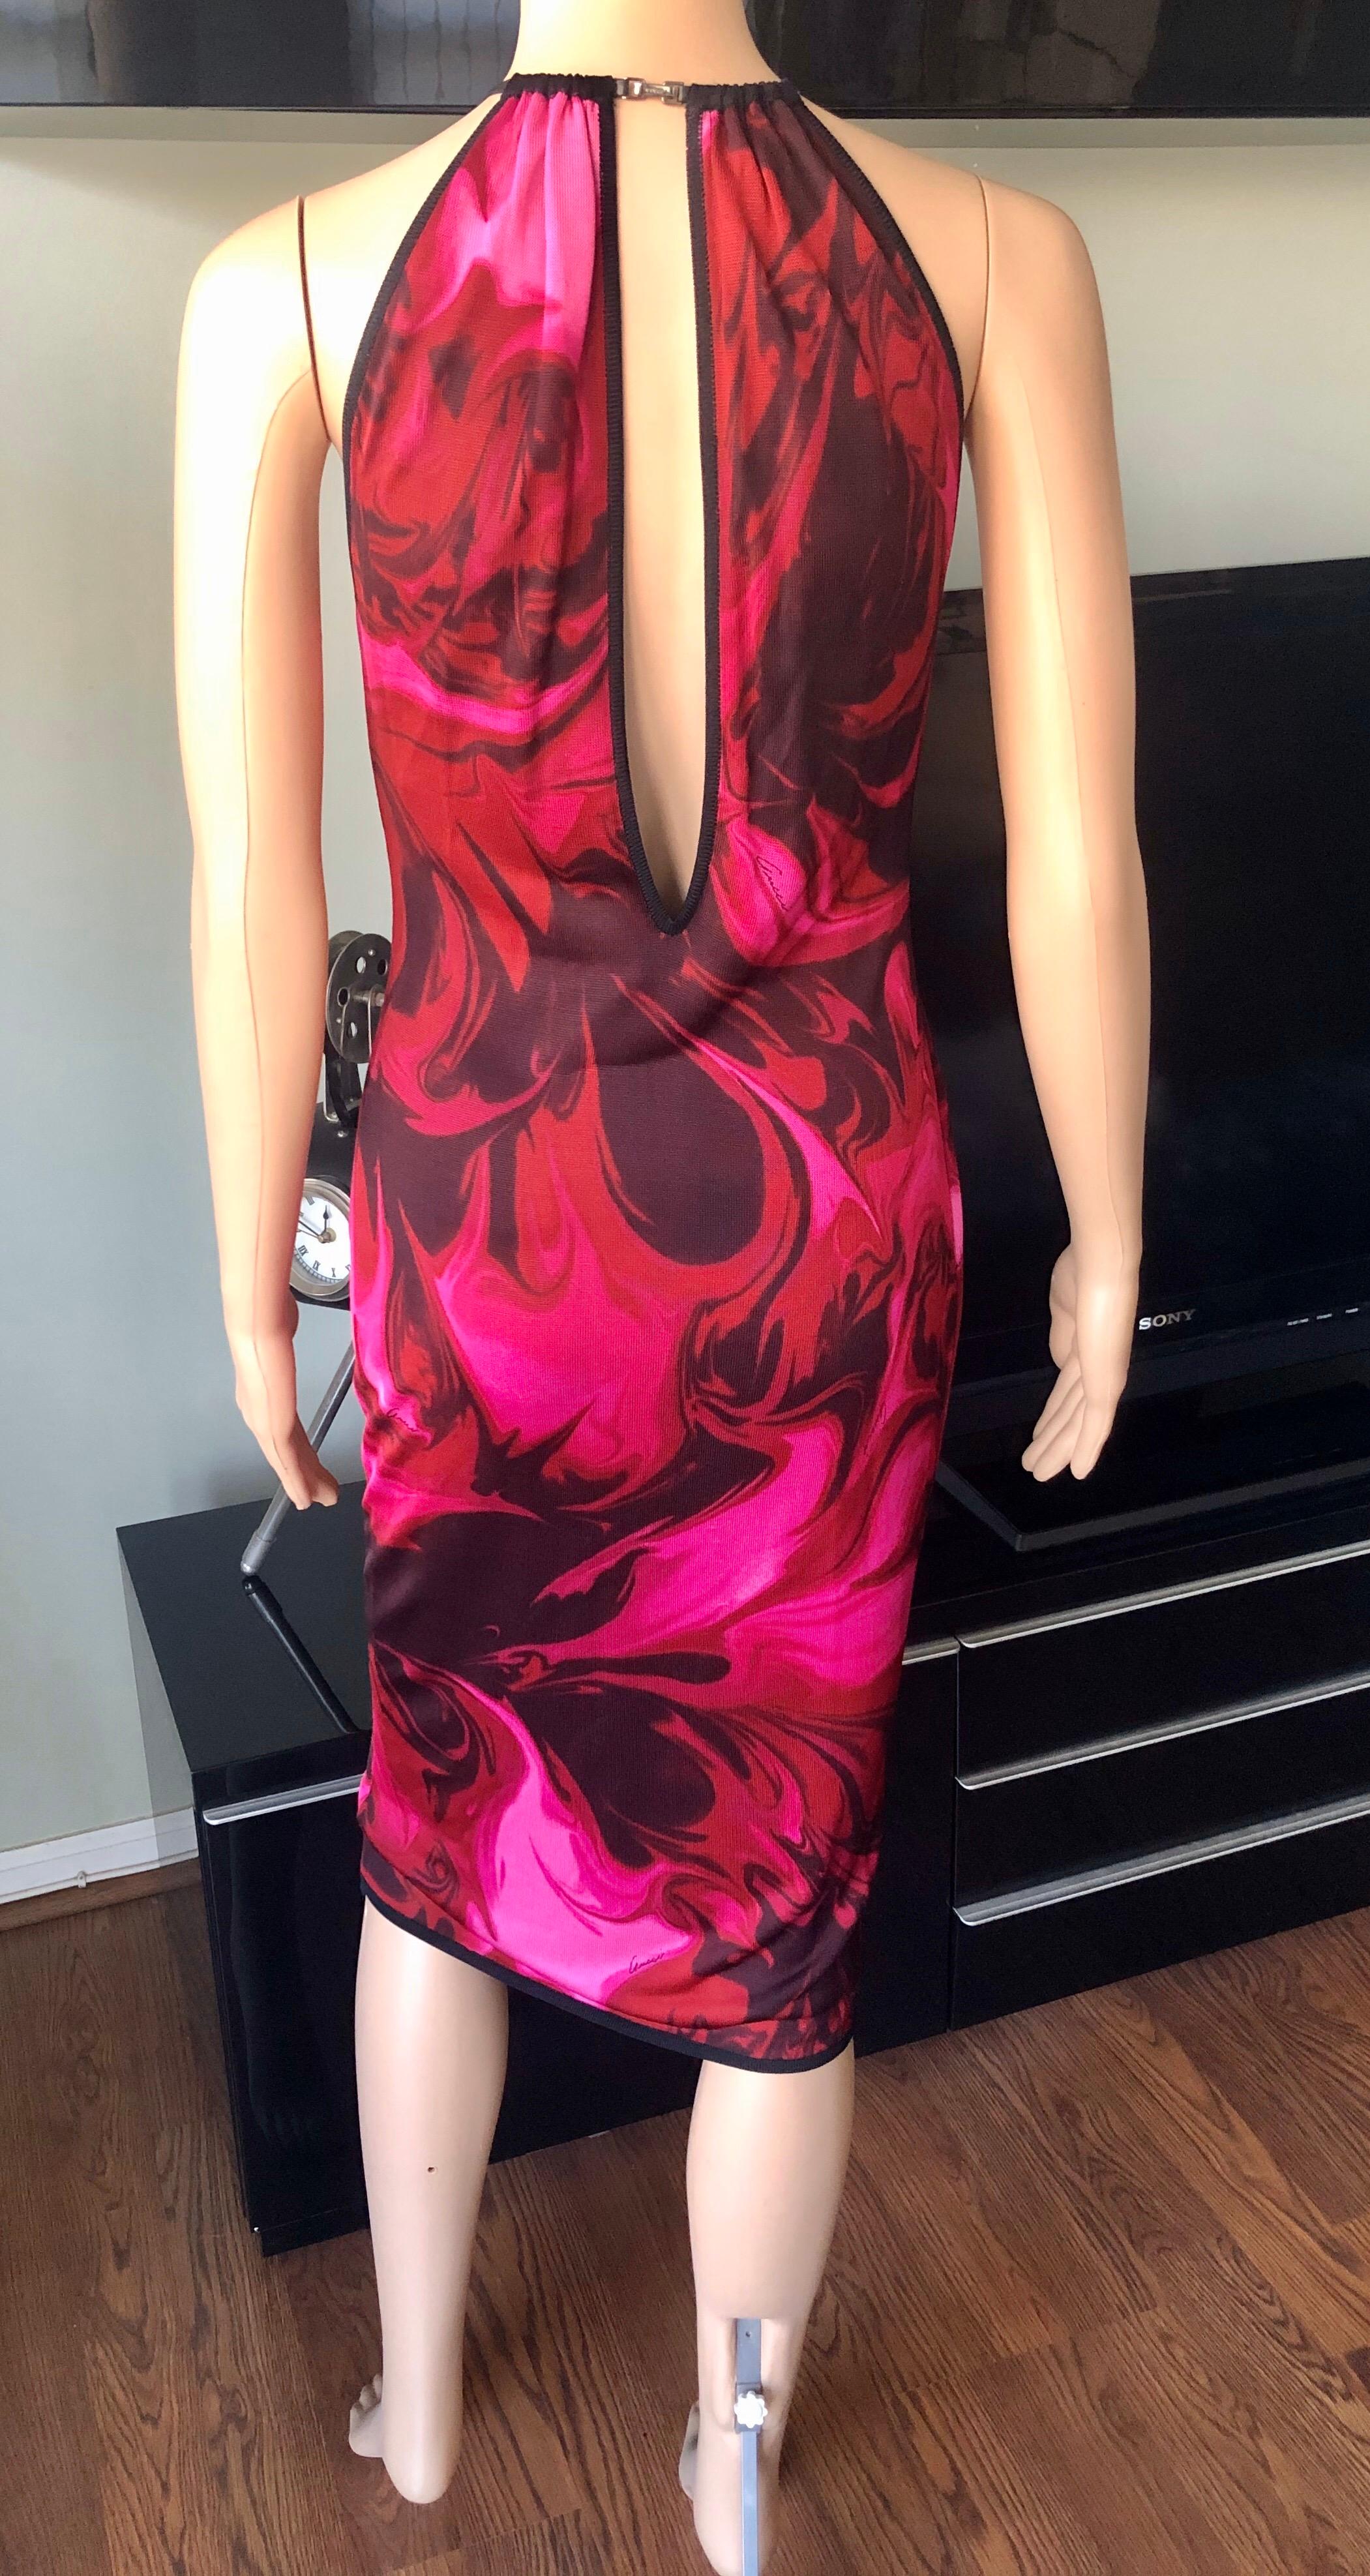 Tom Ford for Gucci S/S 2001 Bodycon Knit Printed Midi Dress

Tom Ford for Gucci knitted dress featuring red, pink and black abstract print and cutout back.
Please note size tag is missing. Please see below the approximate measurements:
Chest - 15